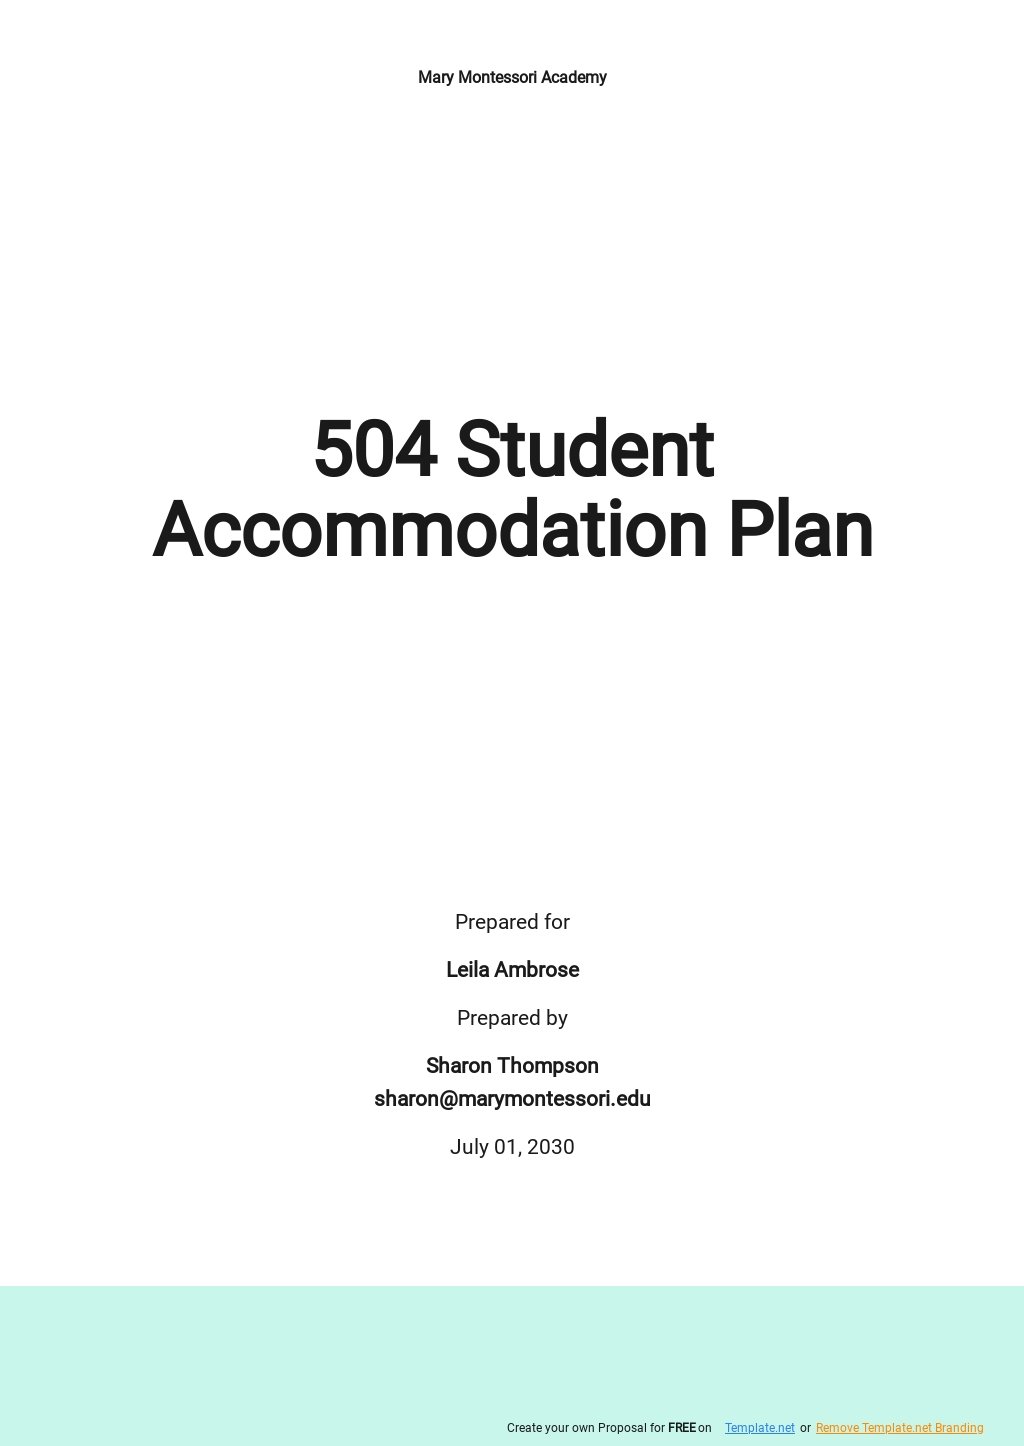 504 plan accommodations for odd